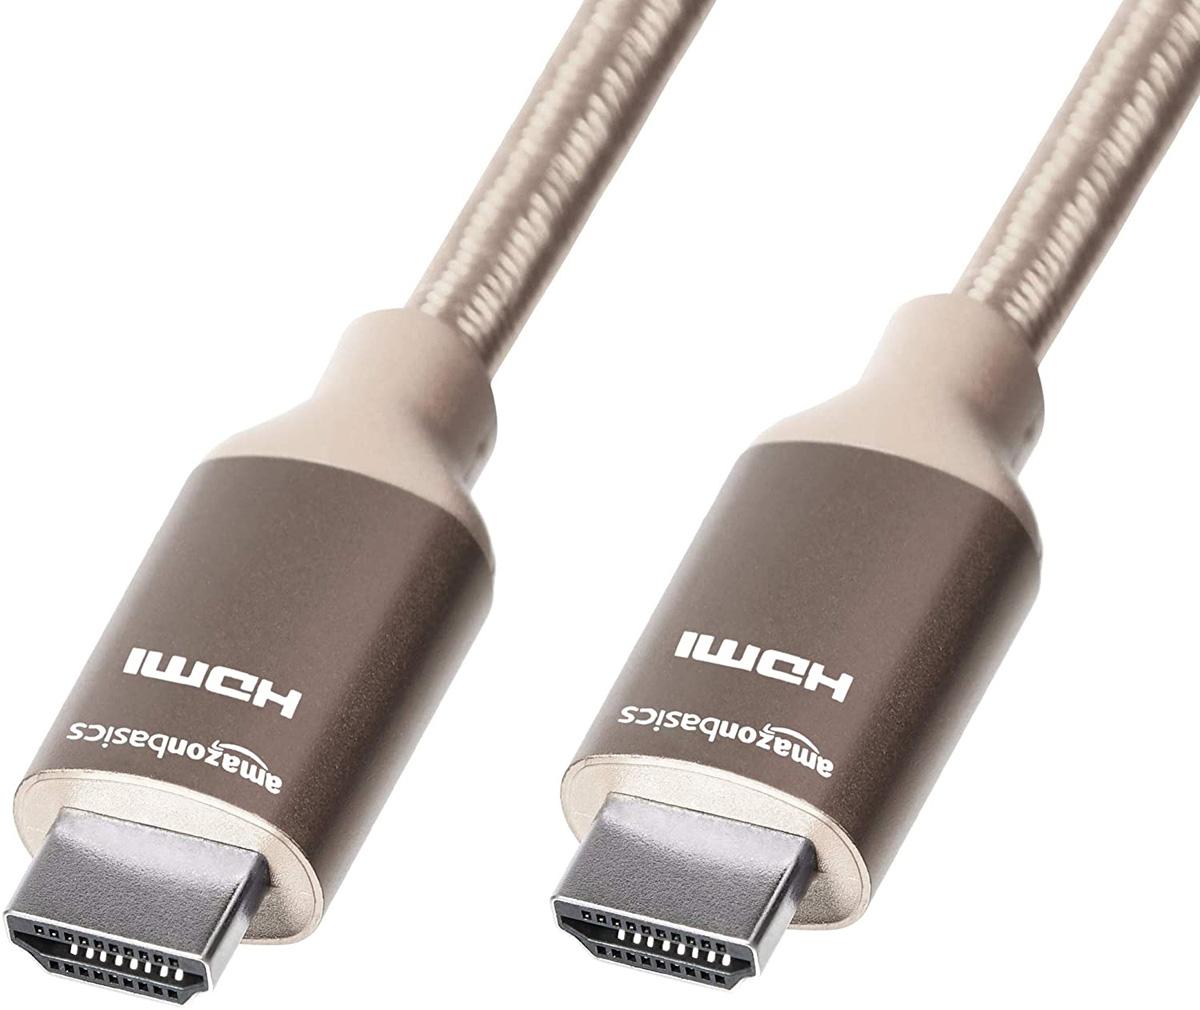 10ft Amazon Basics High-Speed HDMI Cables for $4.37